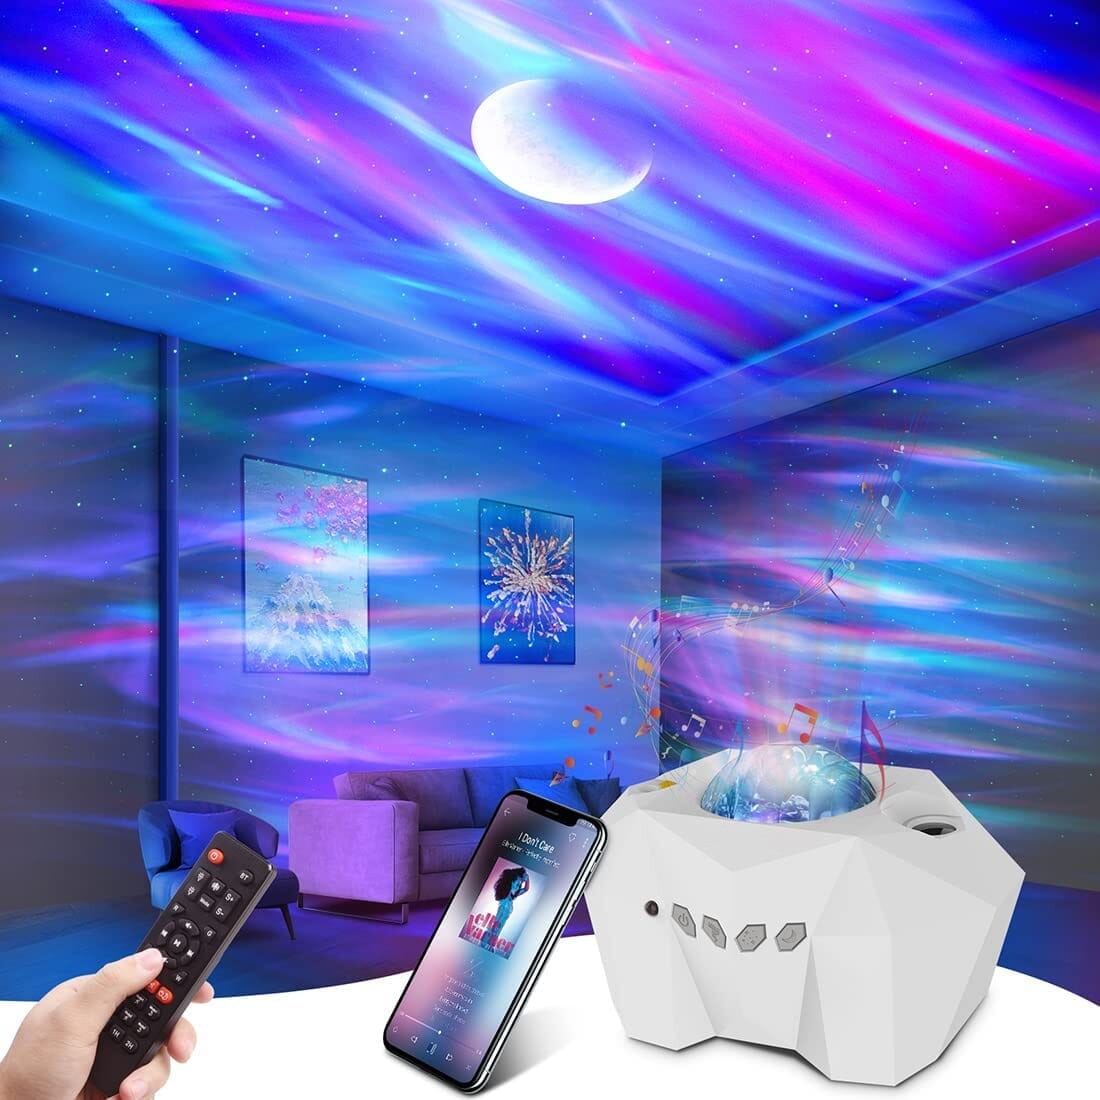 LED Aurora Projector Galaxy Starry Sky Projector Lamp Northern Lights Bedroom Home Room Decoration Nightlights Luminaires Gift 0 The Autistic Innovator 